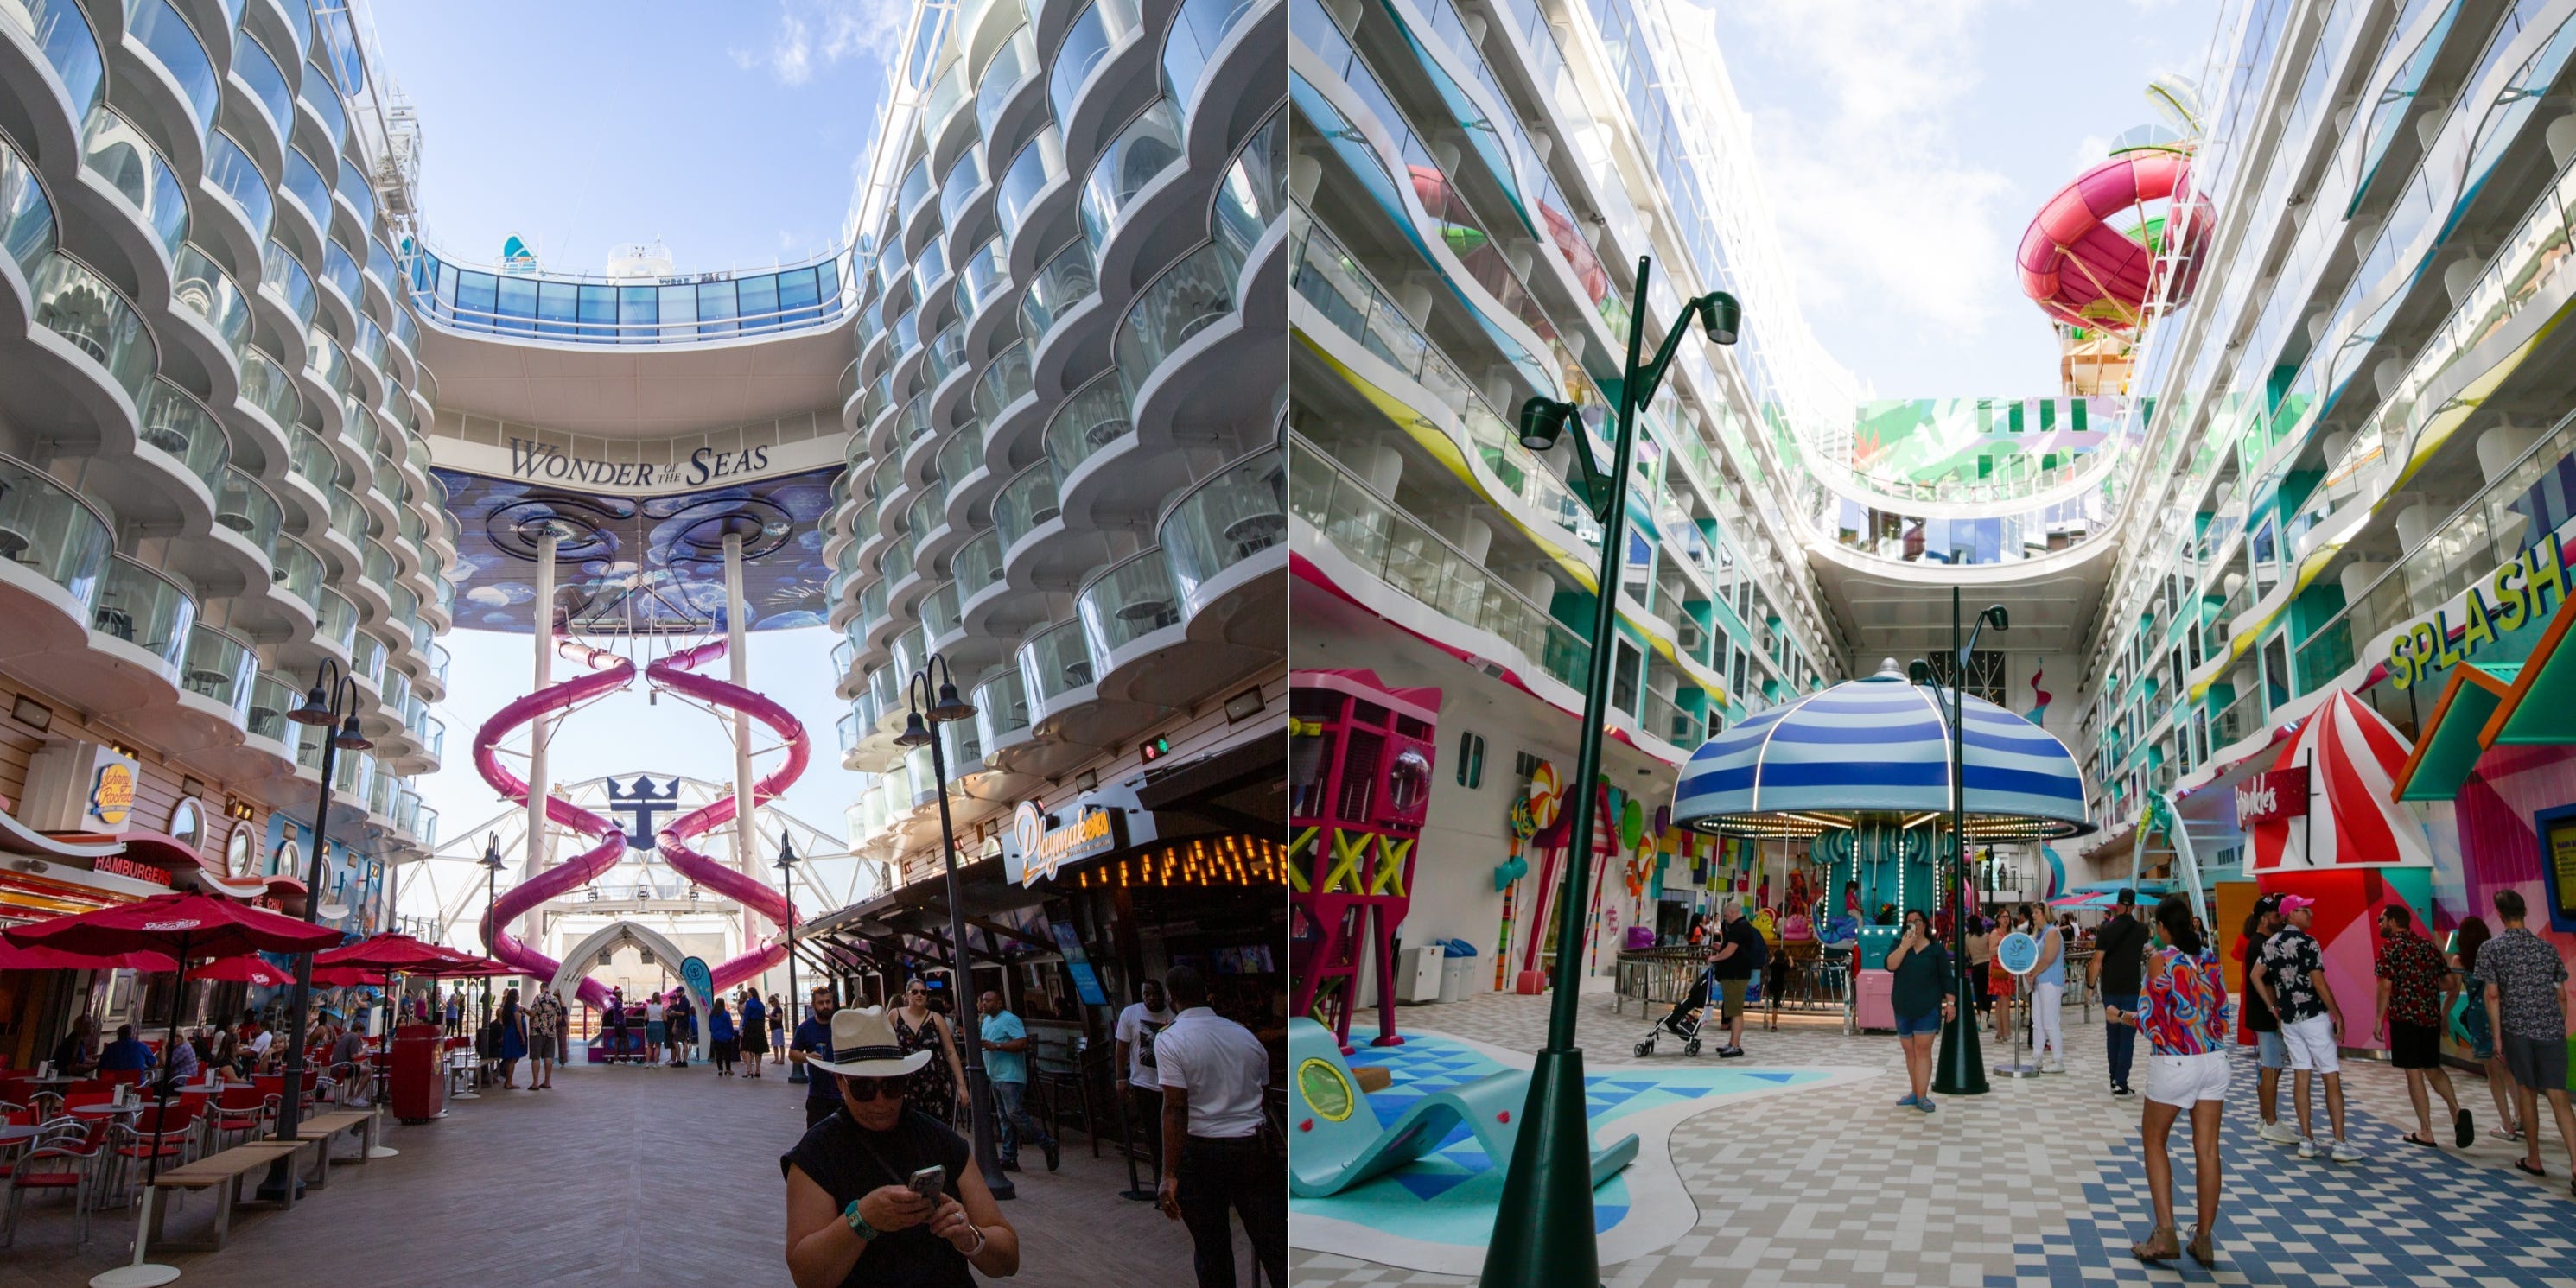 <p><a href="https://www.businessinsider.com/royal-caribbean-wonder-of-the-seas-cruise-ship-best-photos">Boardwalk</a> delivered exactly as it had promised: an open-air space grounded by wood-planked floors, a hot dog stand, a sweets store, and kitschy, colorful decor.</p><p><a href="https://www.businessinsider.com/royal-caribbean-icon-of-the-seas-cruise-ship-photo-tour-2024-1">Icon of the Seas' Surfside</a>, designed for families with young children, felt like its closest dupe.</p><p>Both neighborhoods had a carousel, an outdoor playground, and family-friendly dining. But Surfside was more toddler-friendly, as suggested by the children's water play area and nighttime story readings.</p>